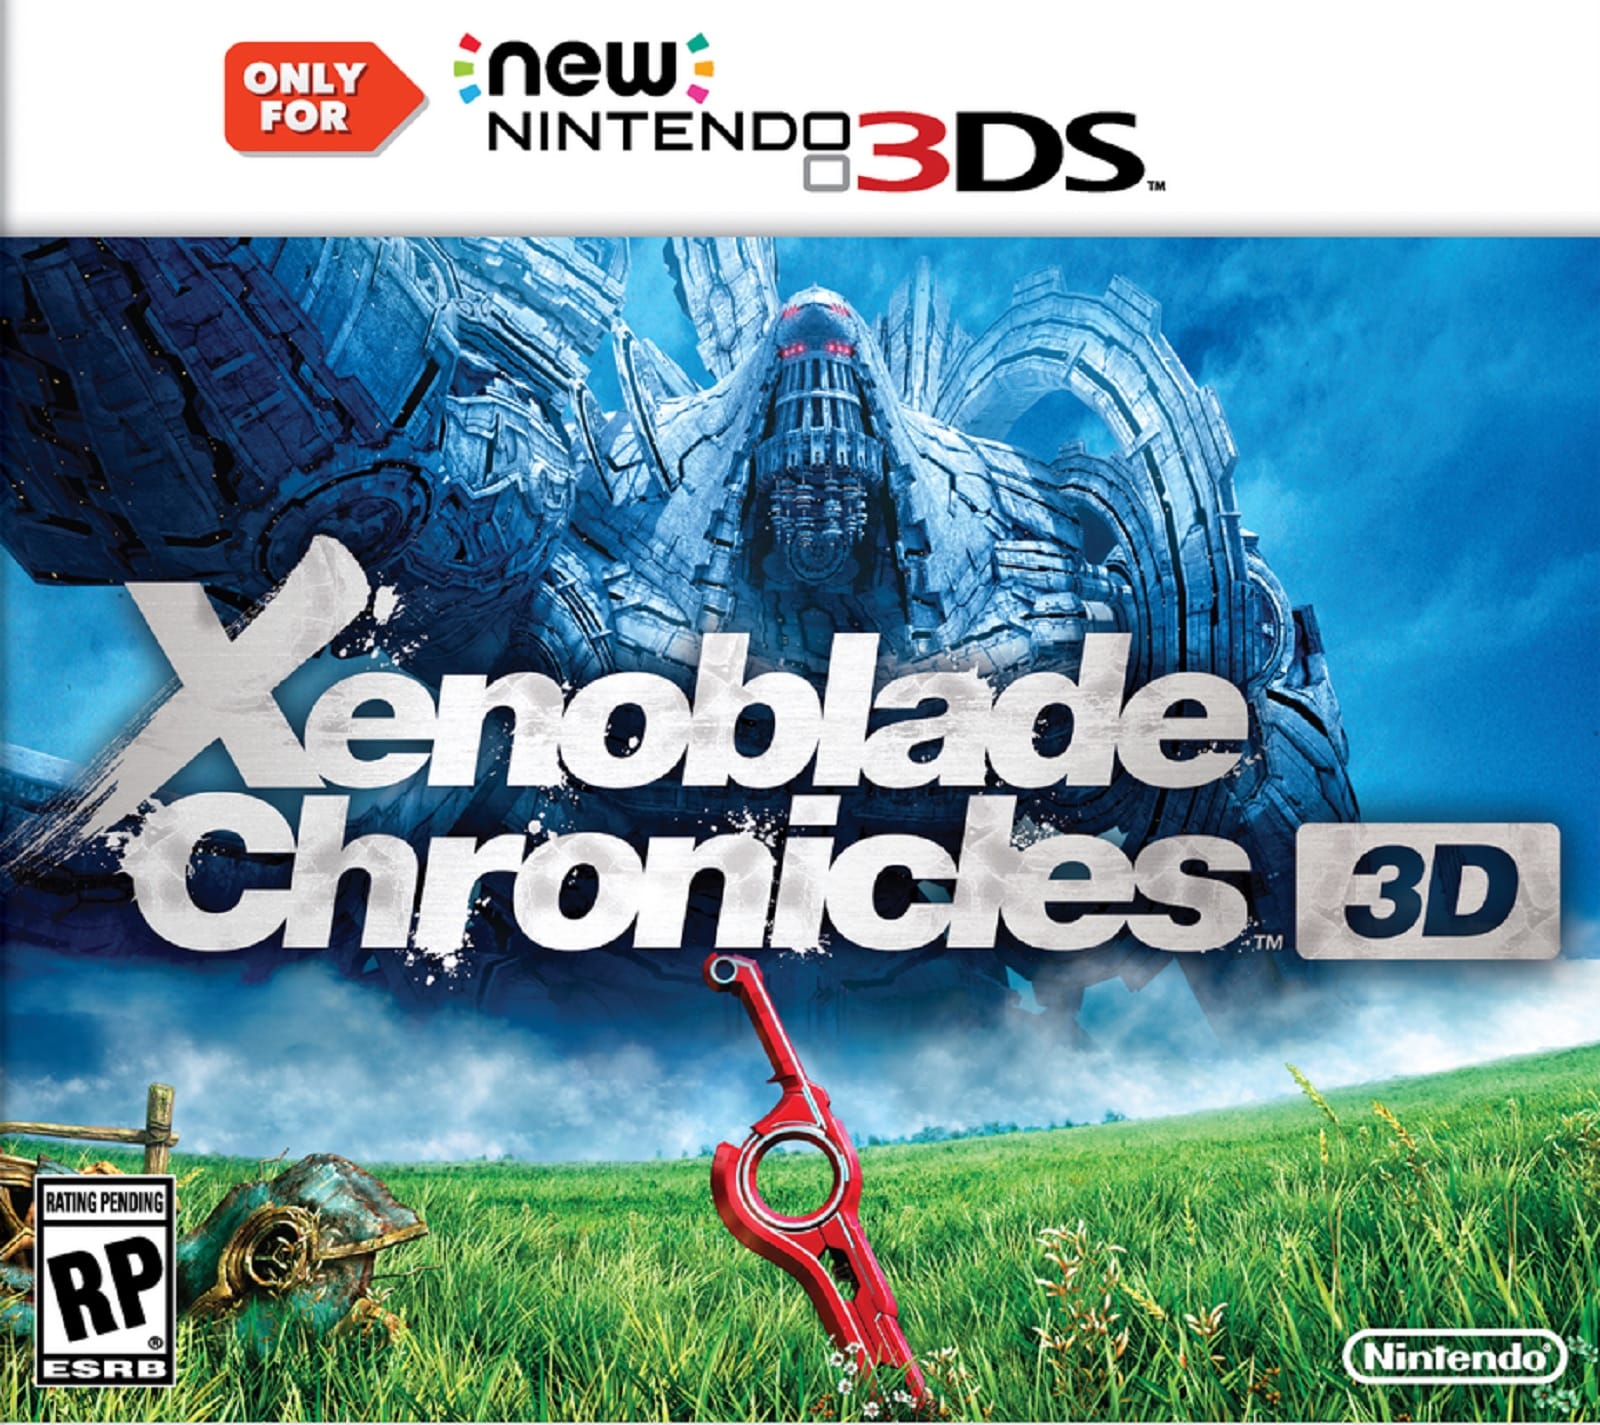 xenoblade-chronicles-3d-release-date-announced-only-plays-on-new-3ds-xl-systems-video-games